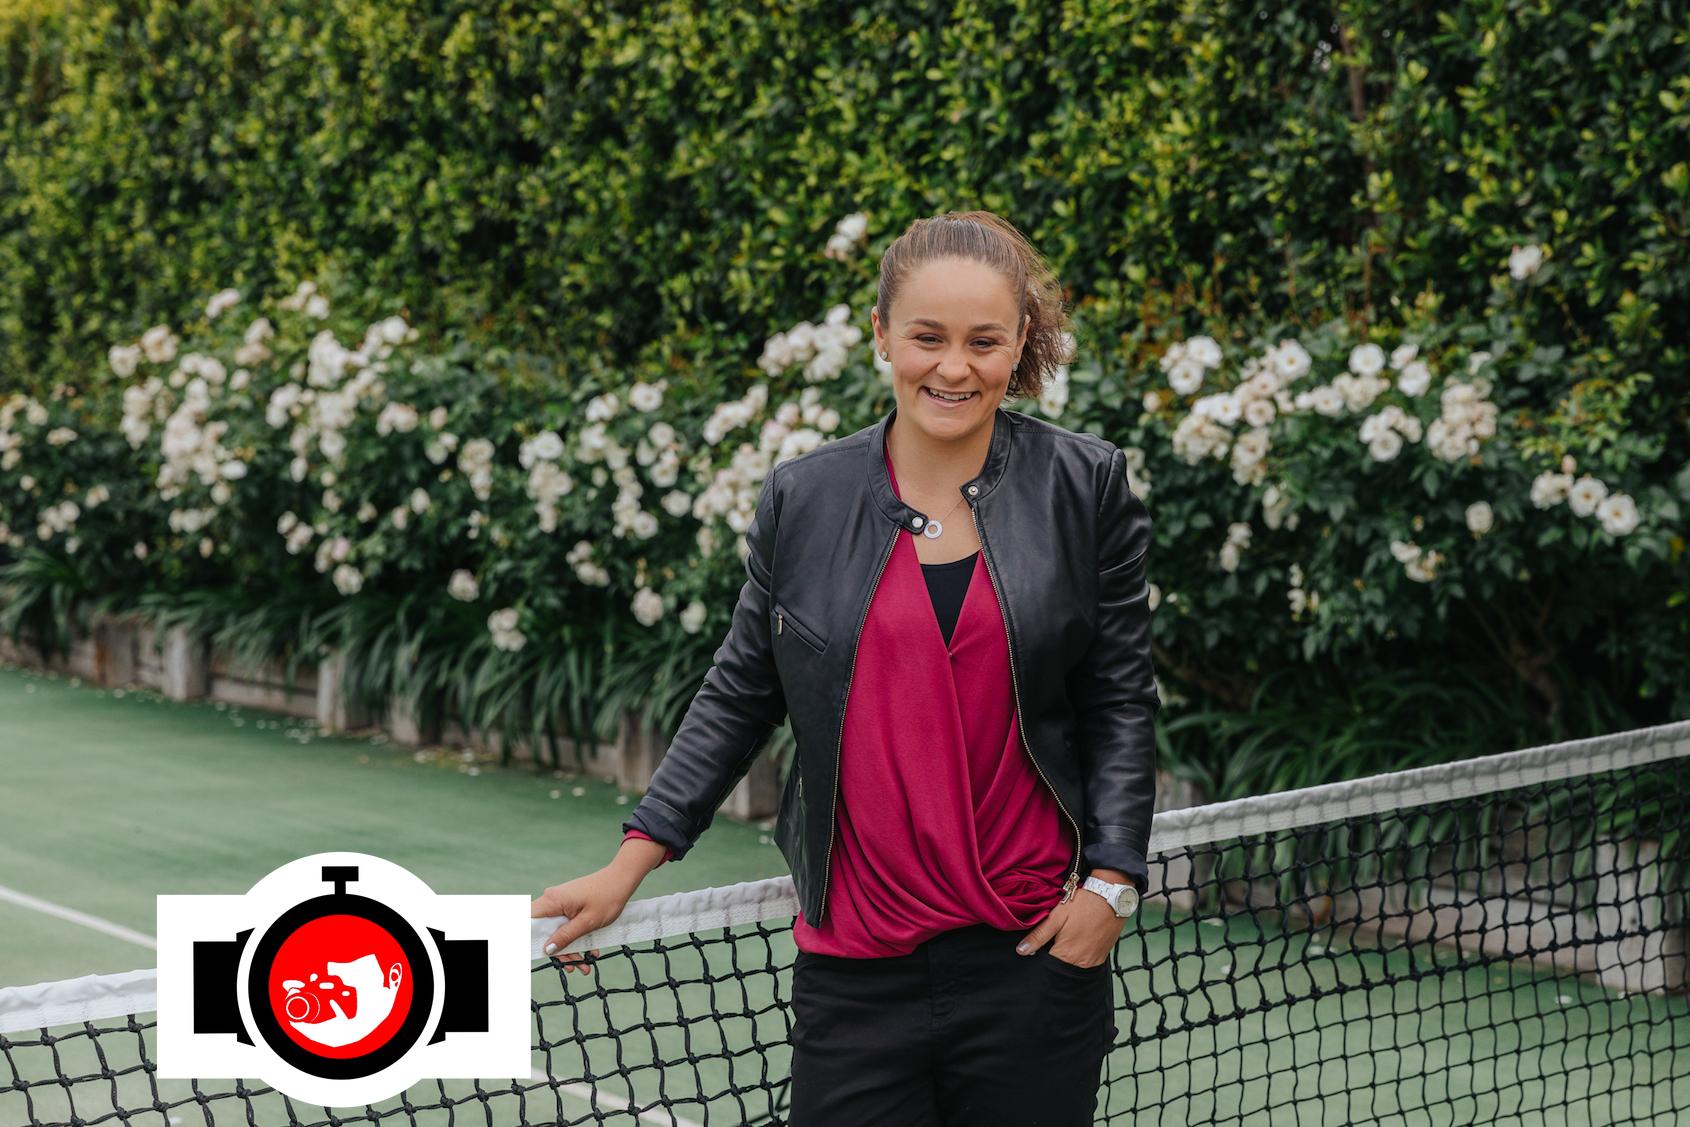 tennis player Ashleigh Barty spotted wearing a Rado 